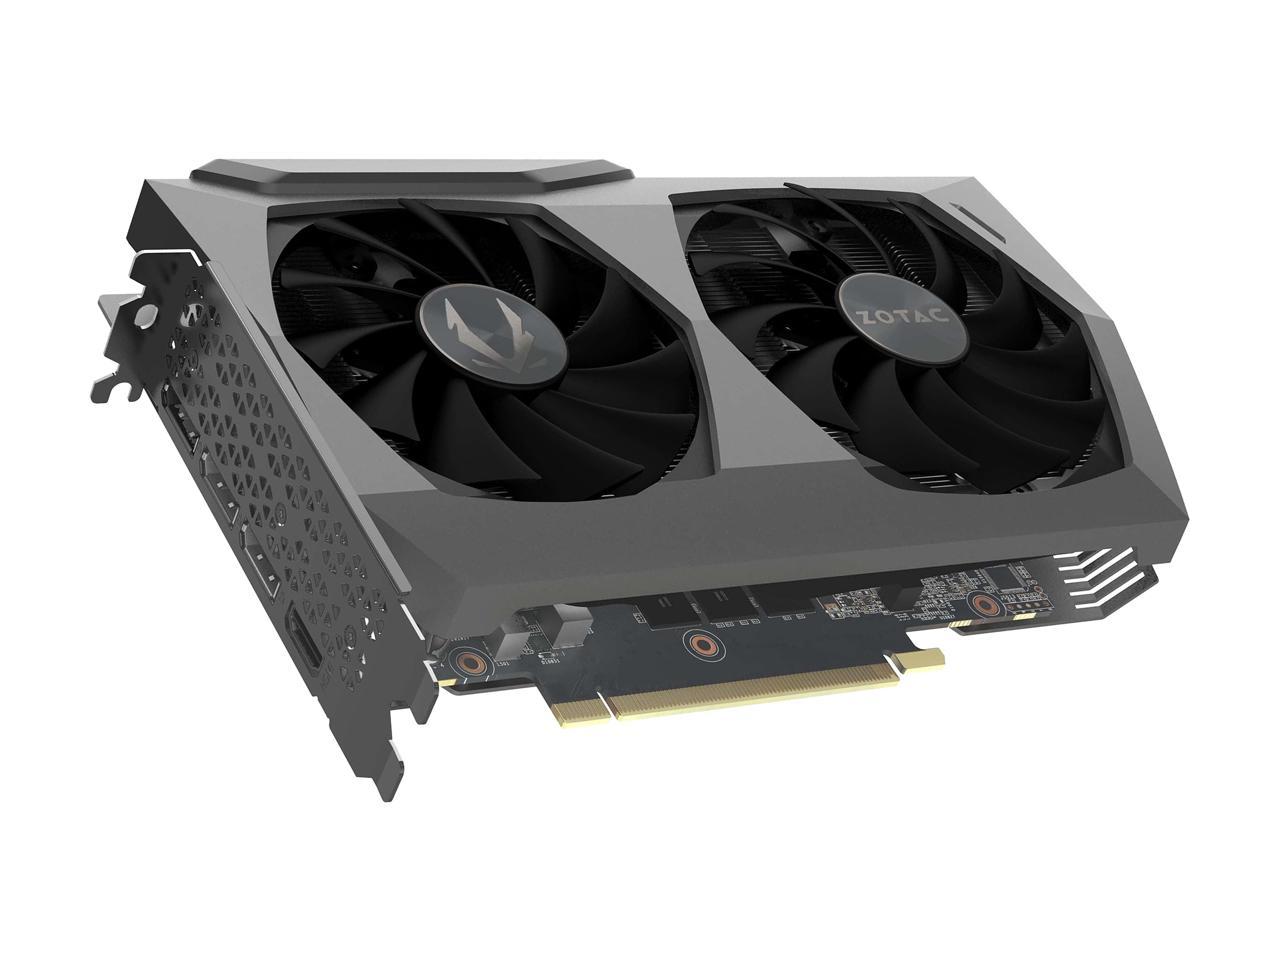 ZOTAC GAMING GeForce RTX 3070 Twin Edge OC LHR 8GB GDDR6 256-bit 14 Gbps  PCIE 4.0 Gaming Graphics Card, IceStorm 2.0 Advanced Cooling, White LED  Logo 